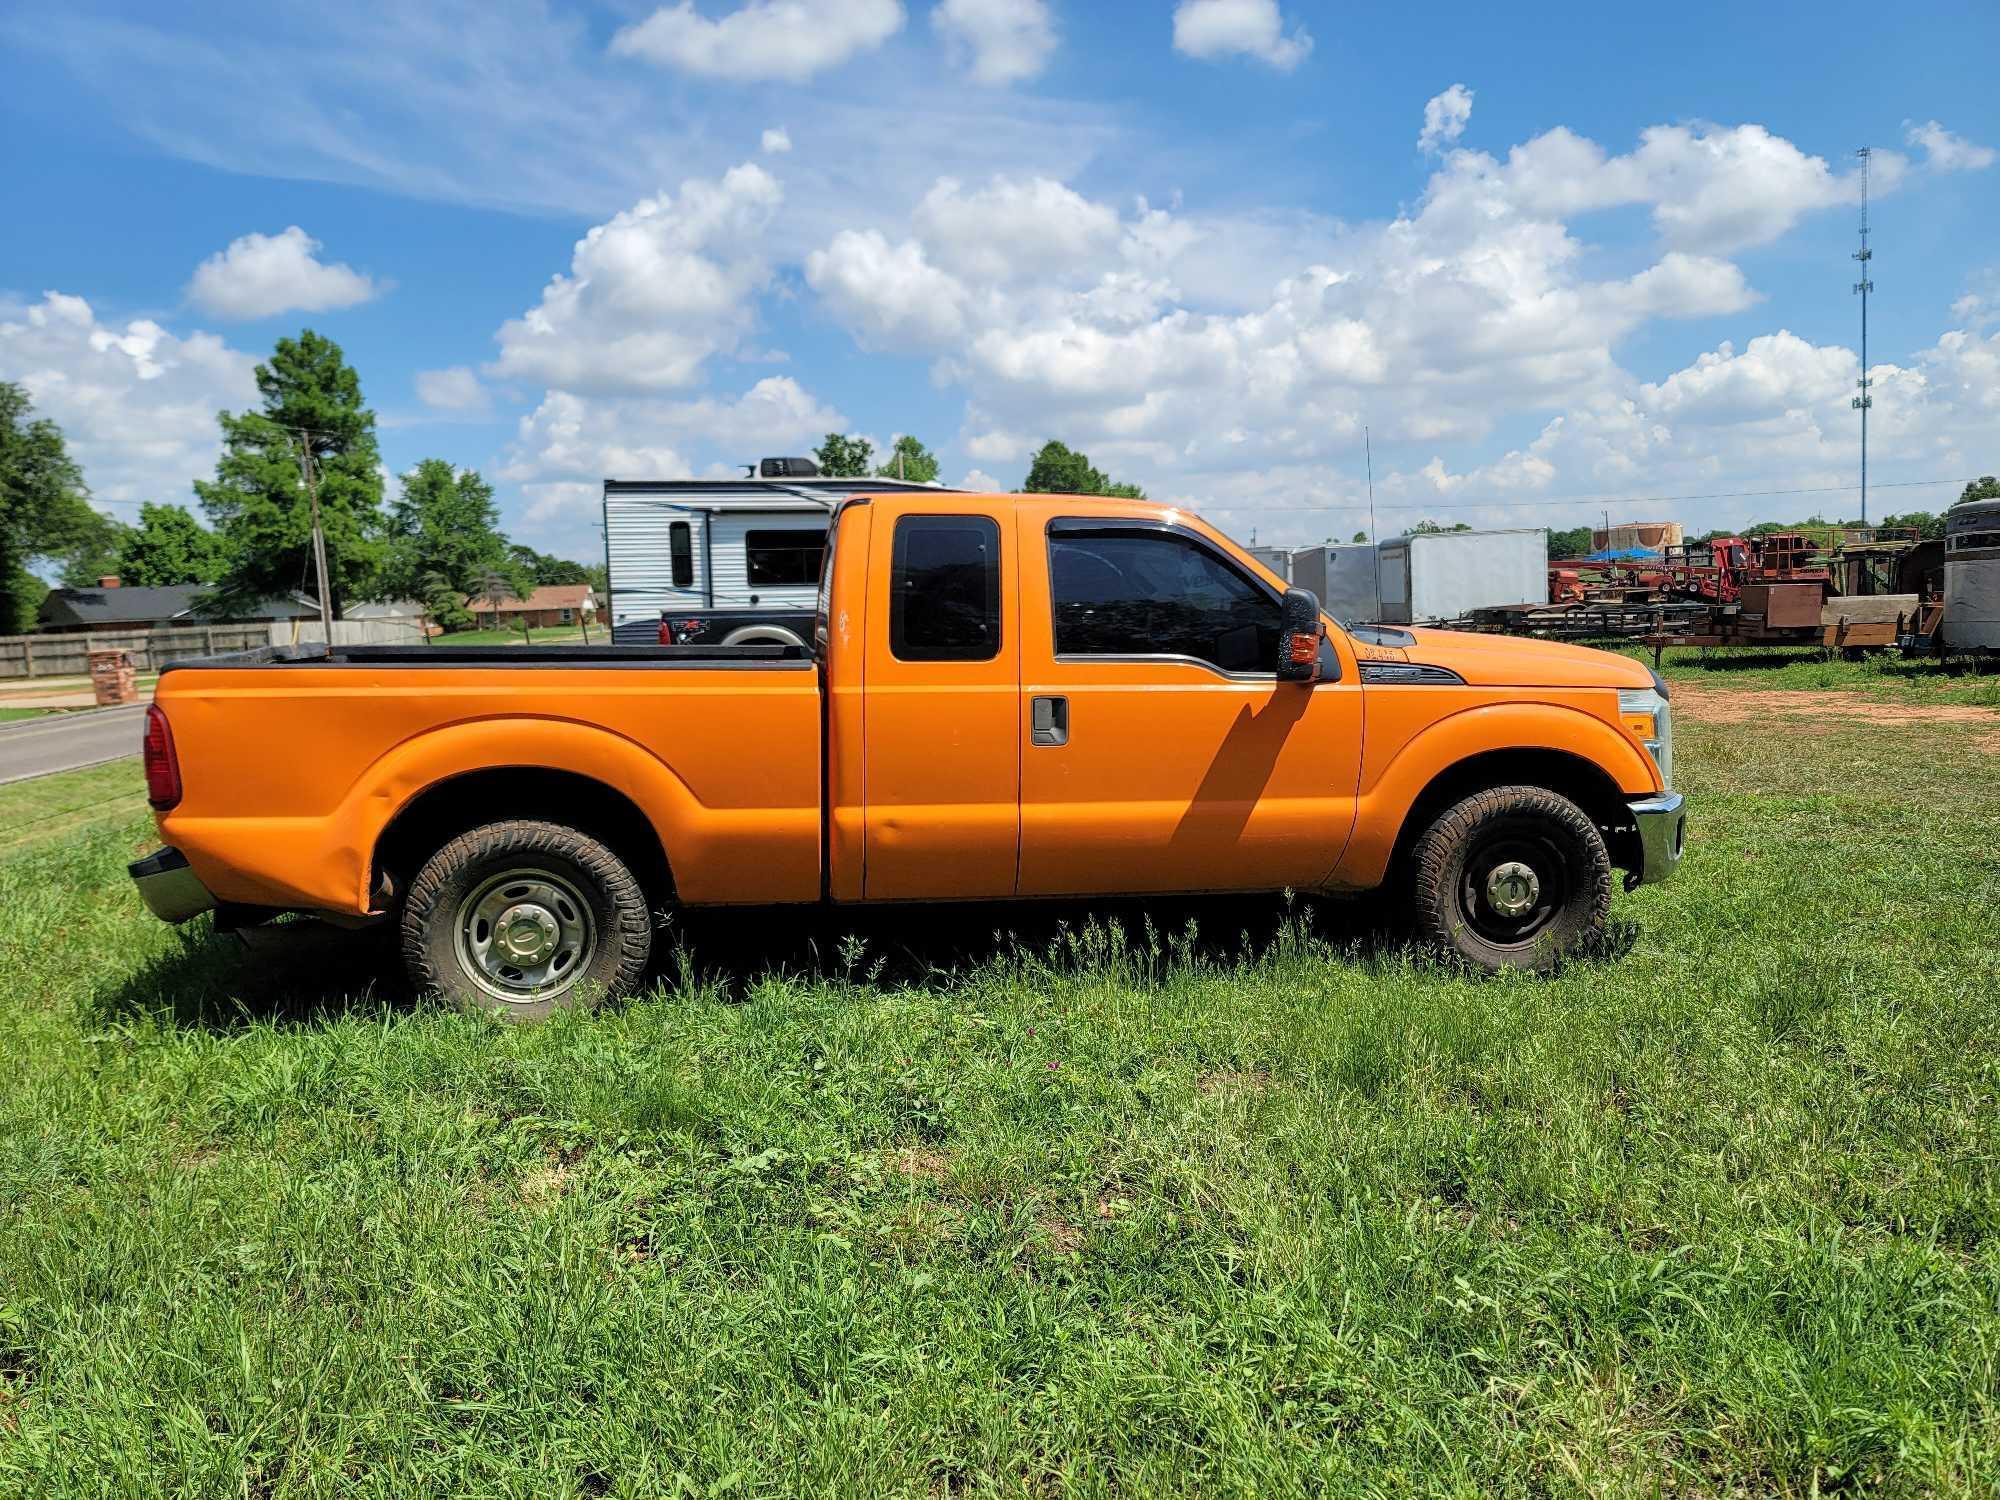 2013 Ford f250 2 wheel dr 254,406 miles